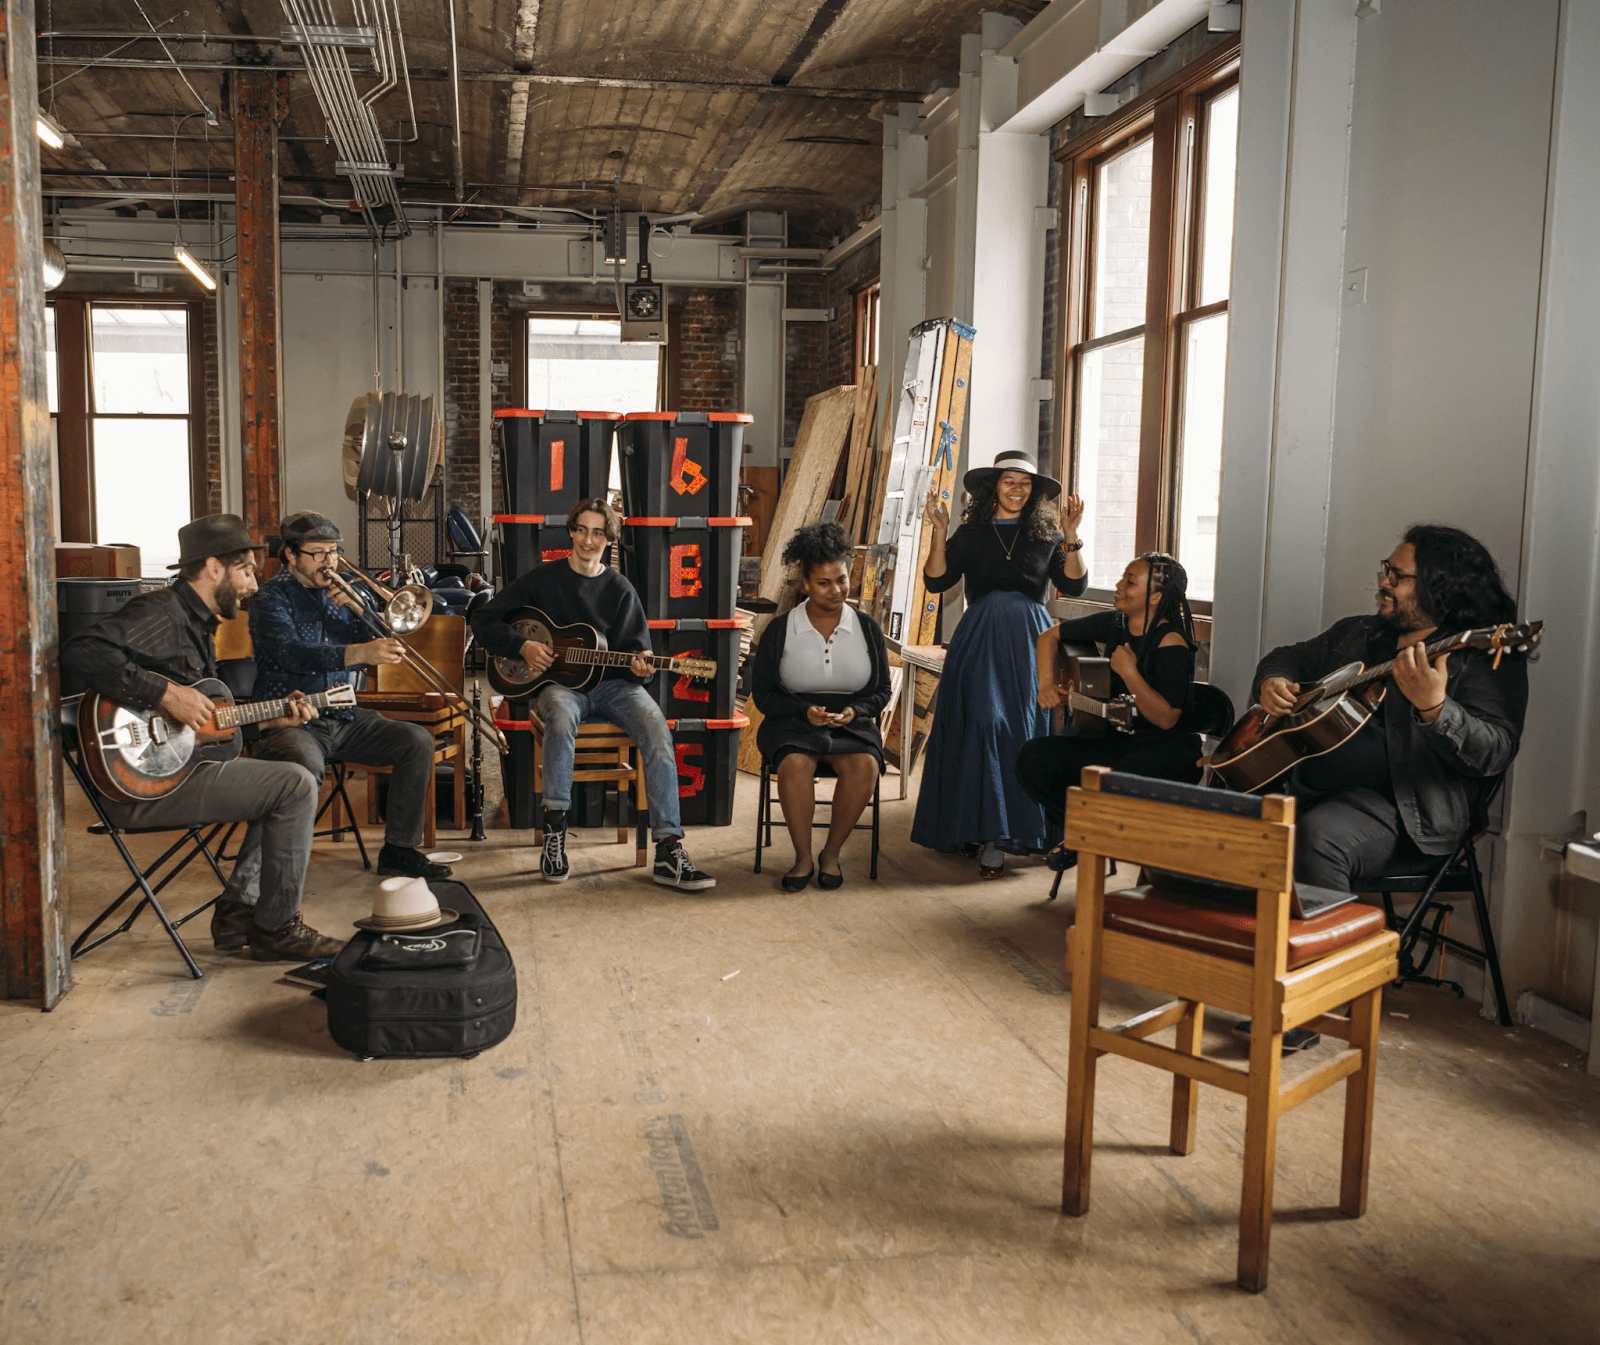 Seven musicians from The Rhapsody Project sitting in an old industrial-looking space playing music together. There are four people with guitars, a trombonist, and another two that look to be singers.